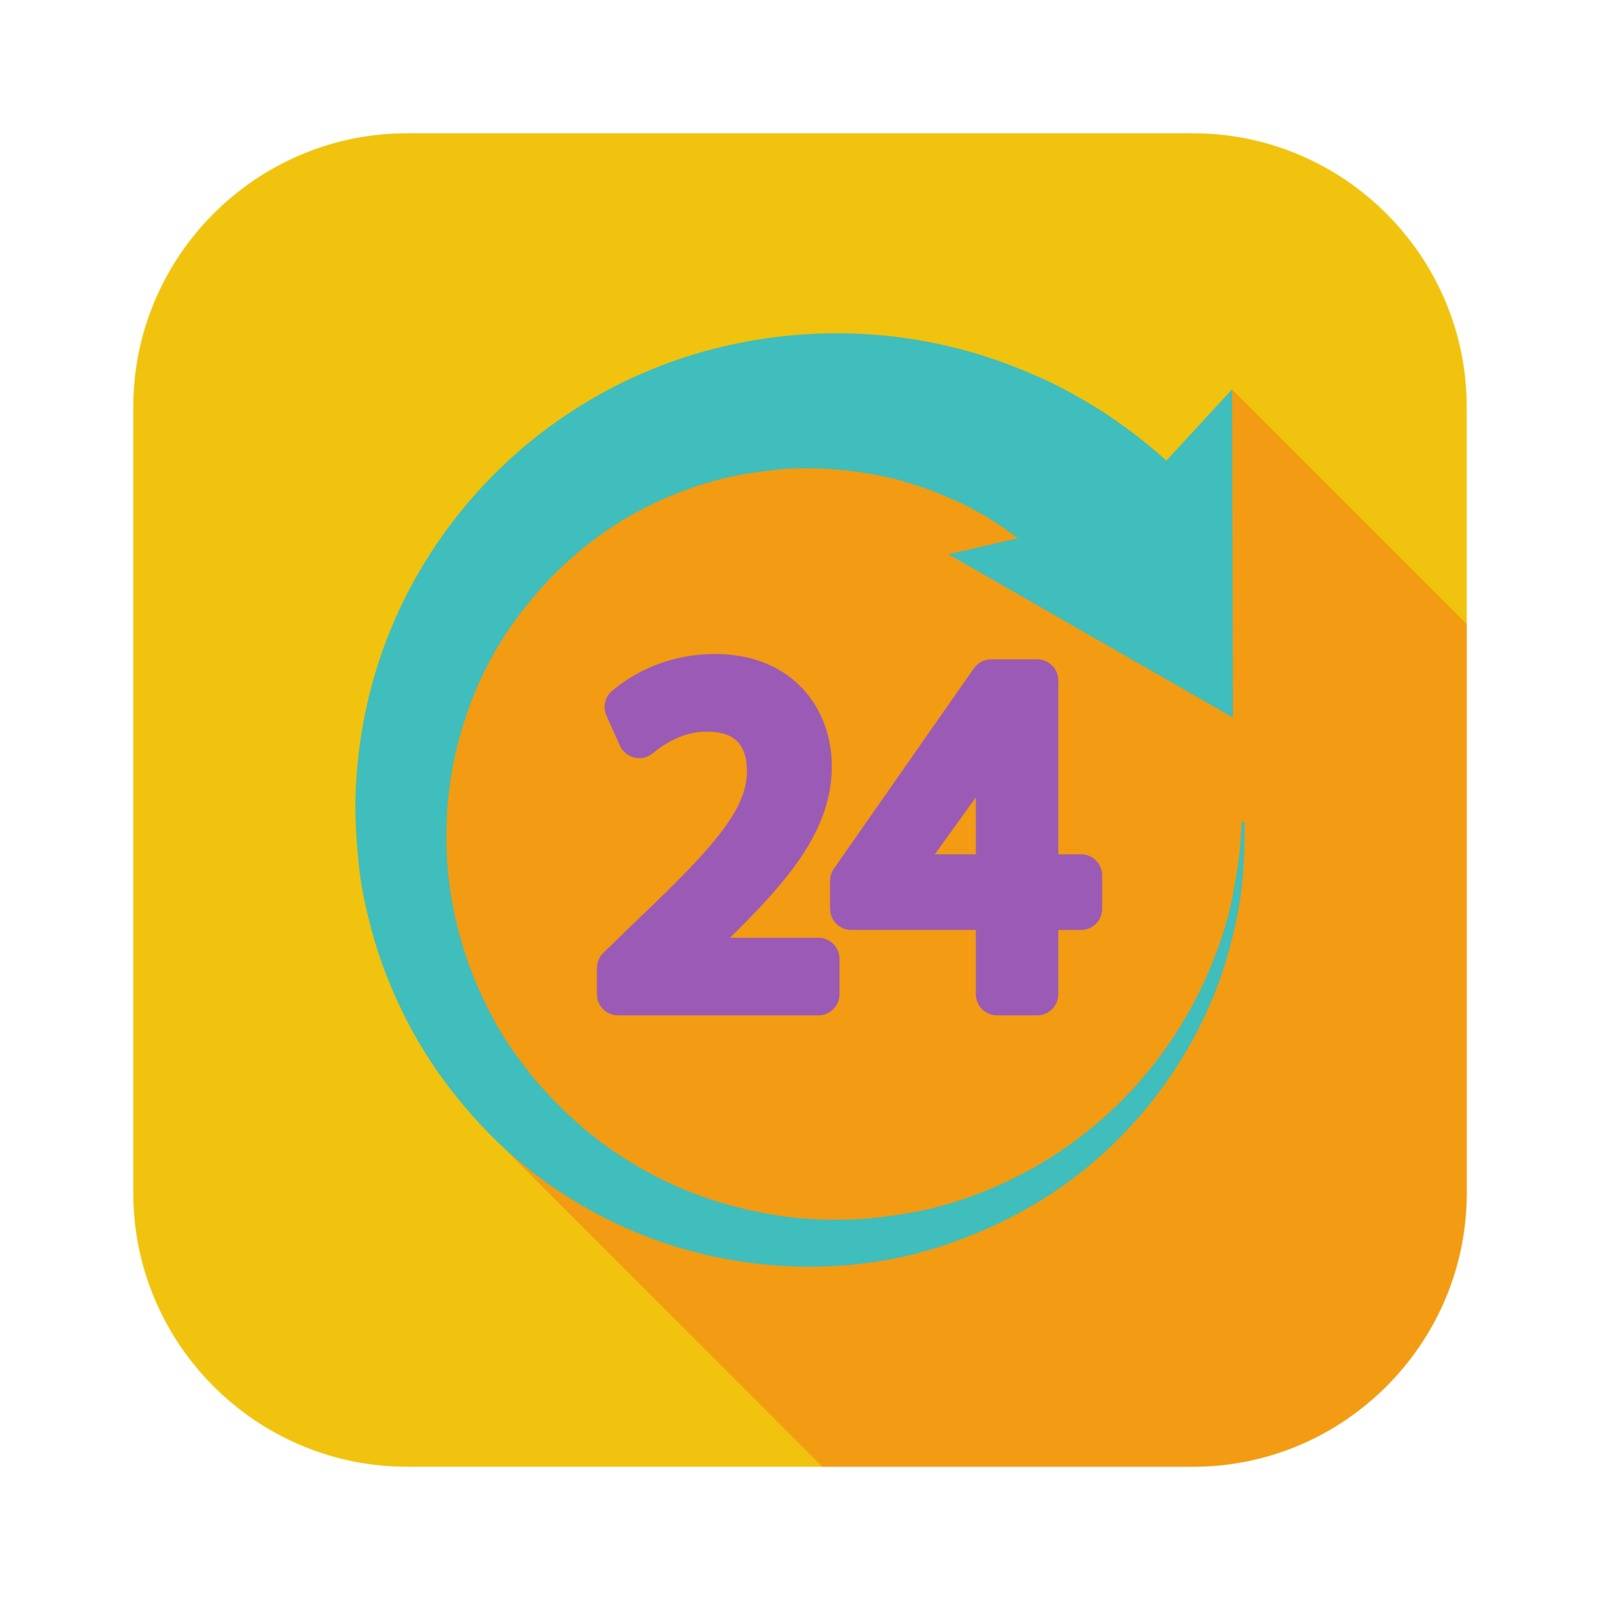 24 hours. Single flat color icon. Vector illustration.